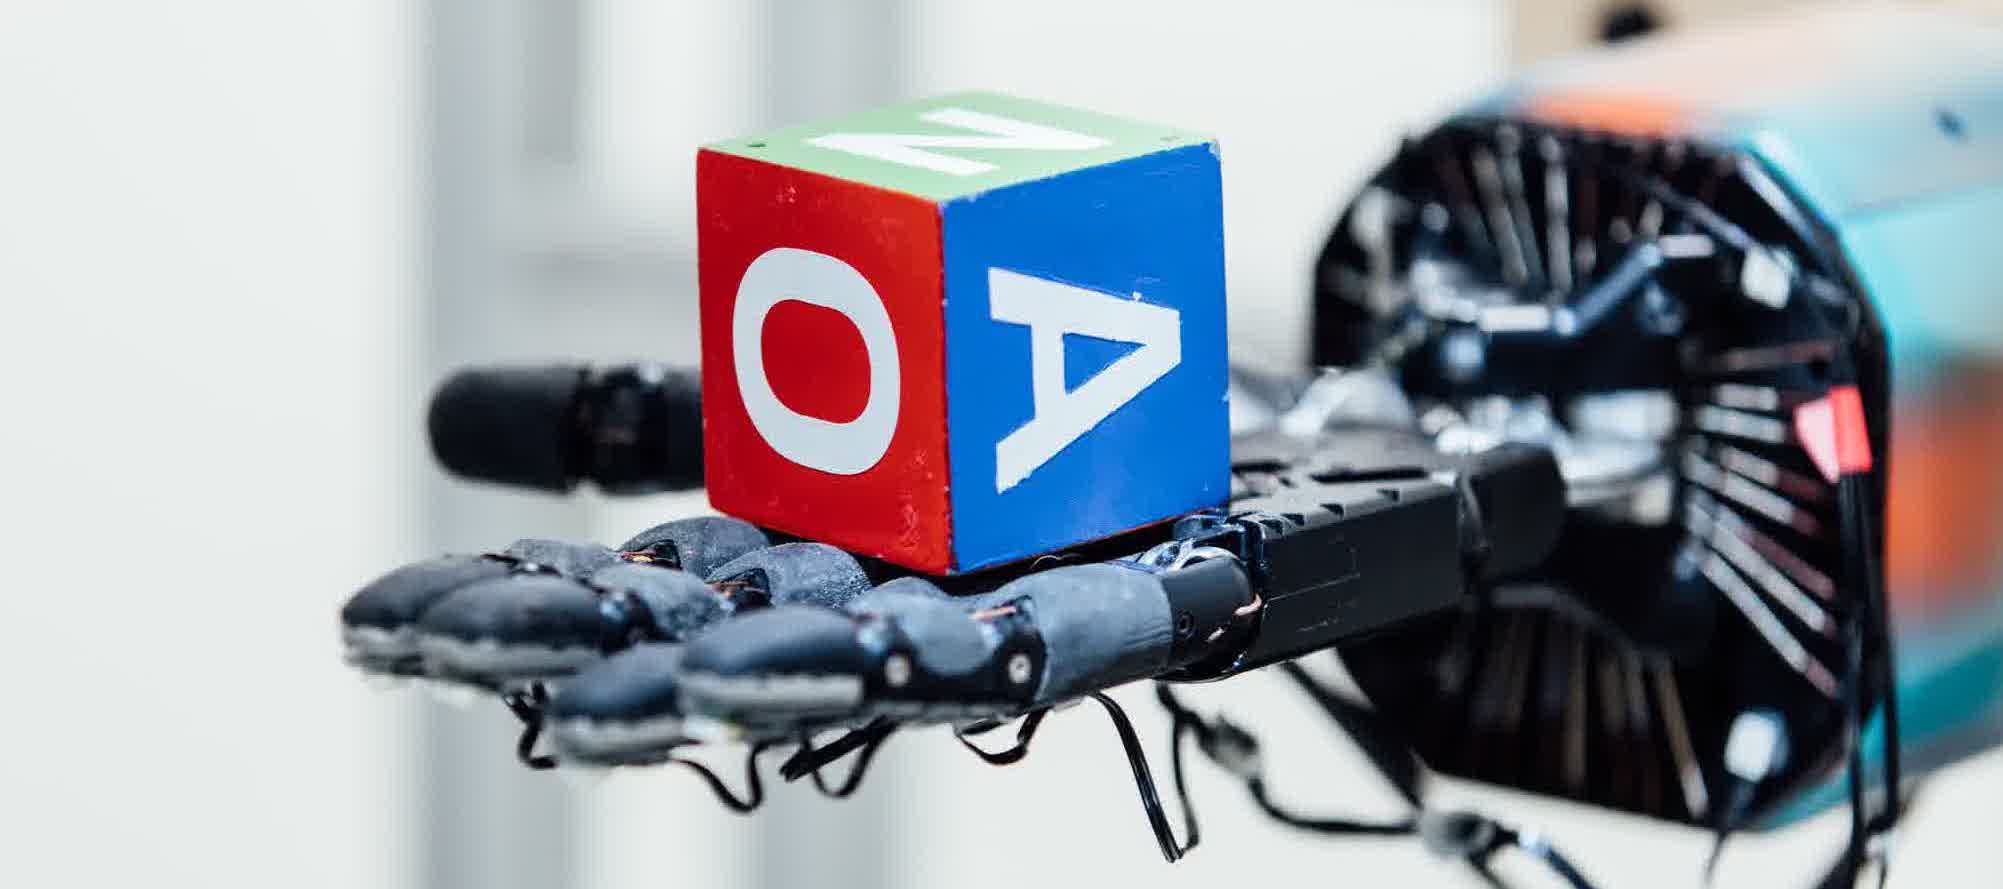 Dactyl learns to manipulate objects with human-like fidelity by training neural networks with data from a massive number of simulations. Source: OpenAI